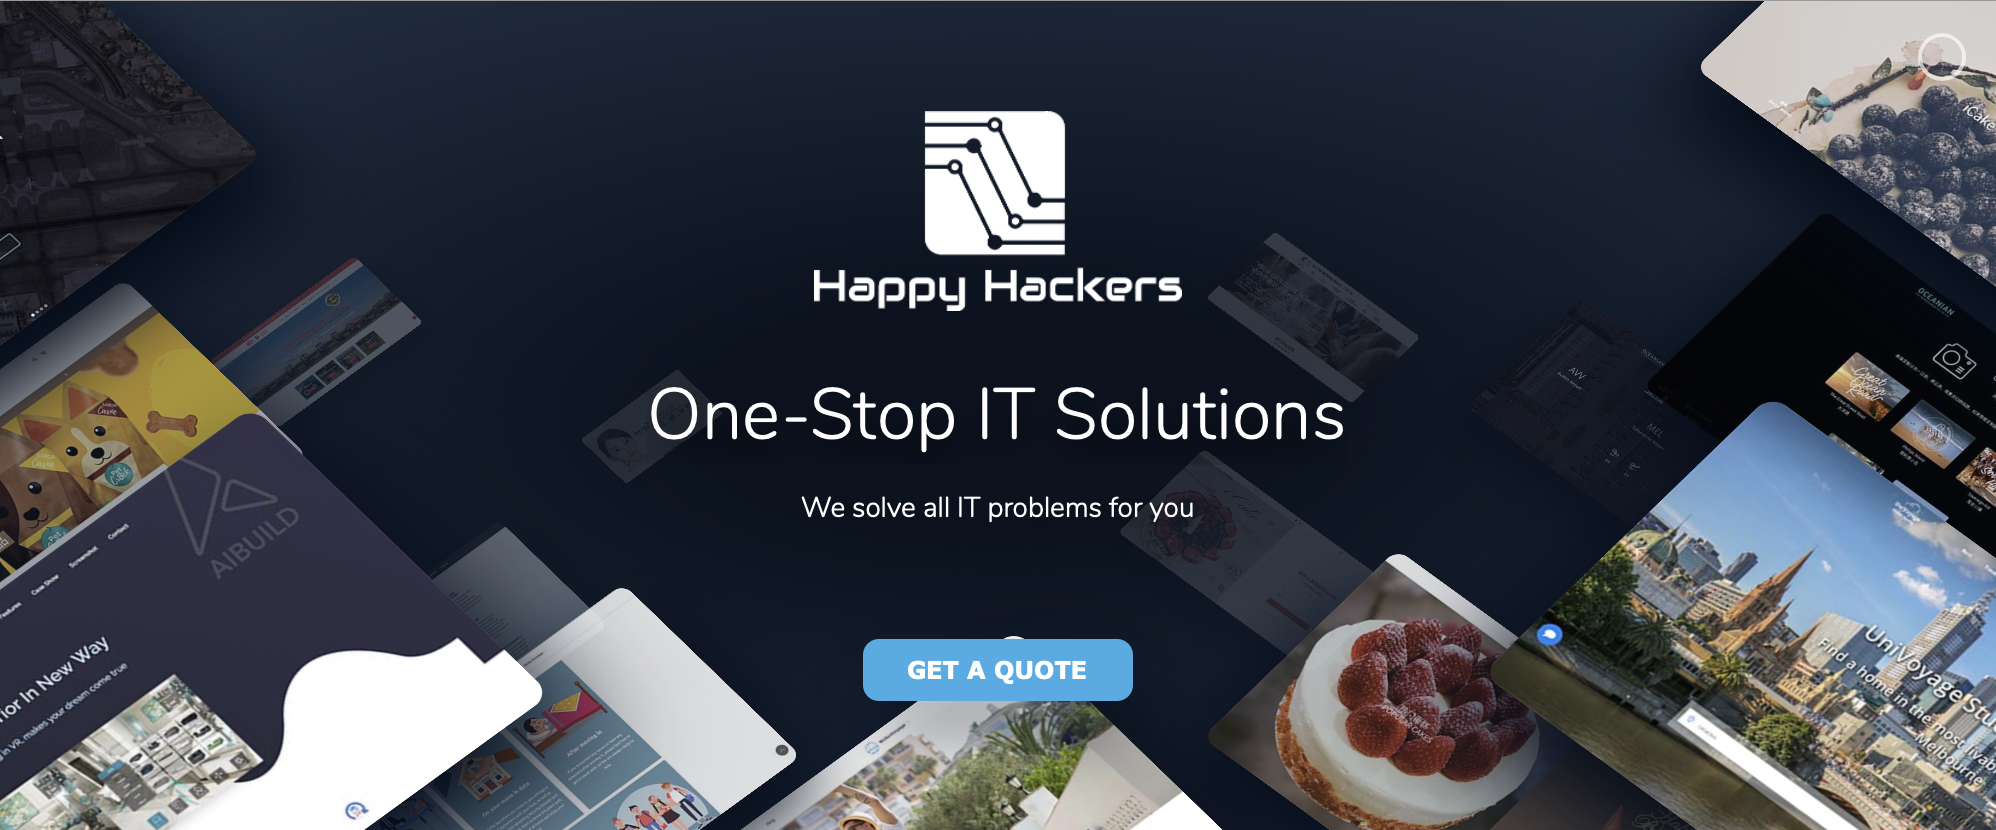 Happy Hackers – One Stop It Solution for App development and Web Design